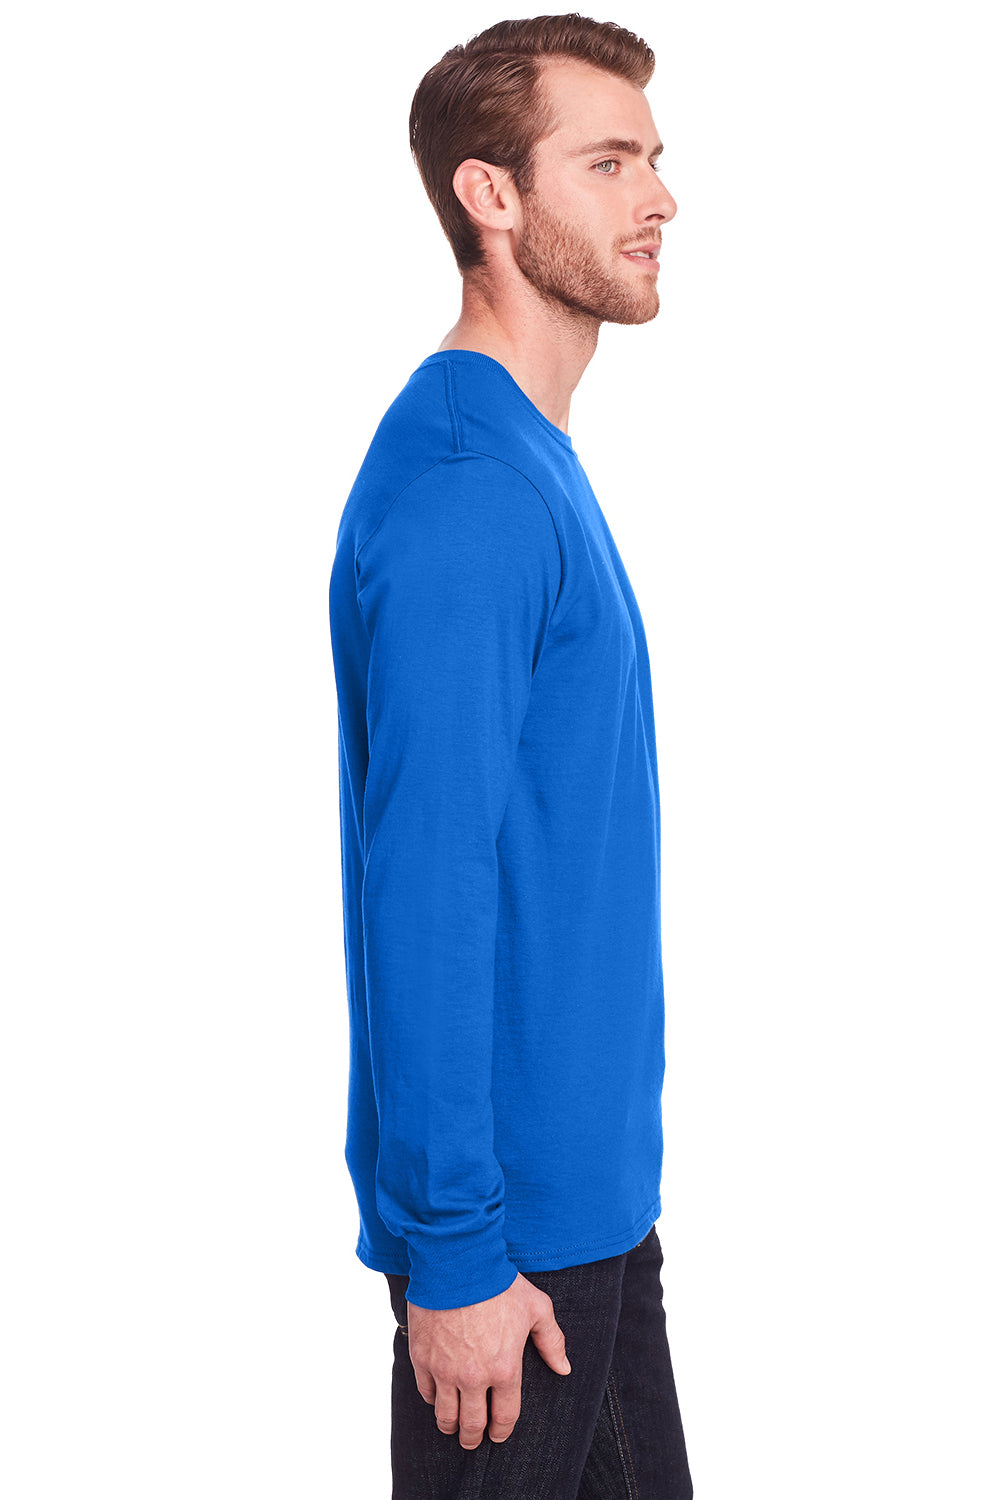 Fruit Of The Loom IC47LSR Mens Iconic Long Sleeve Crewneck T-Shirt Royal Blue Side